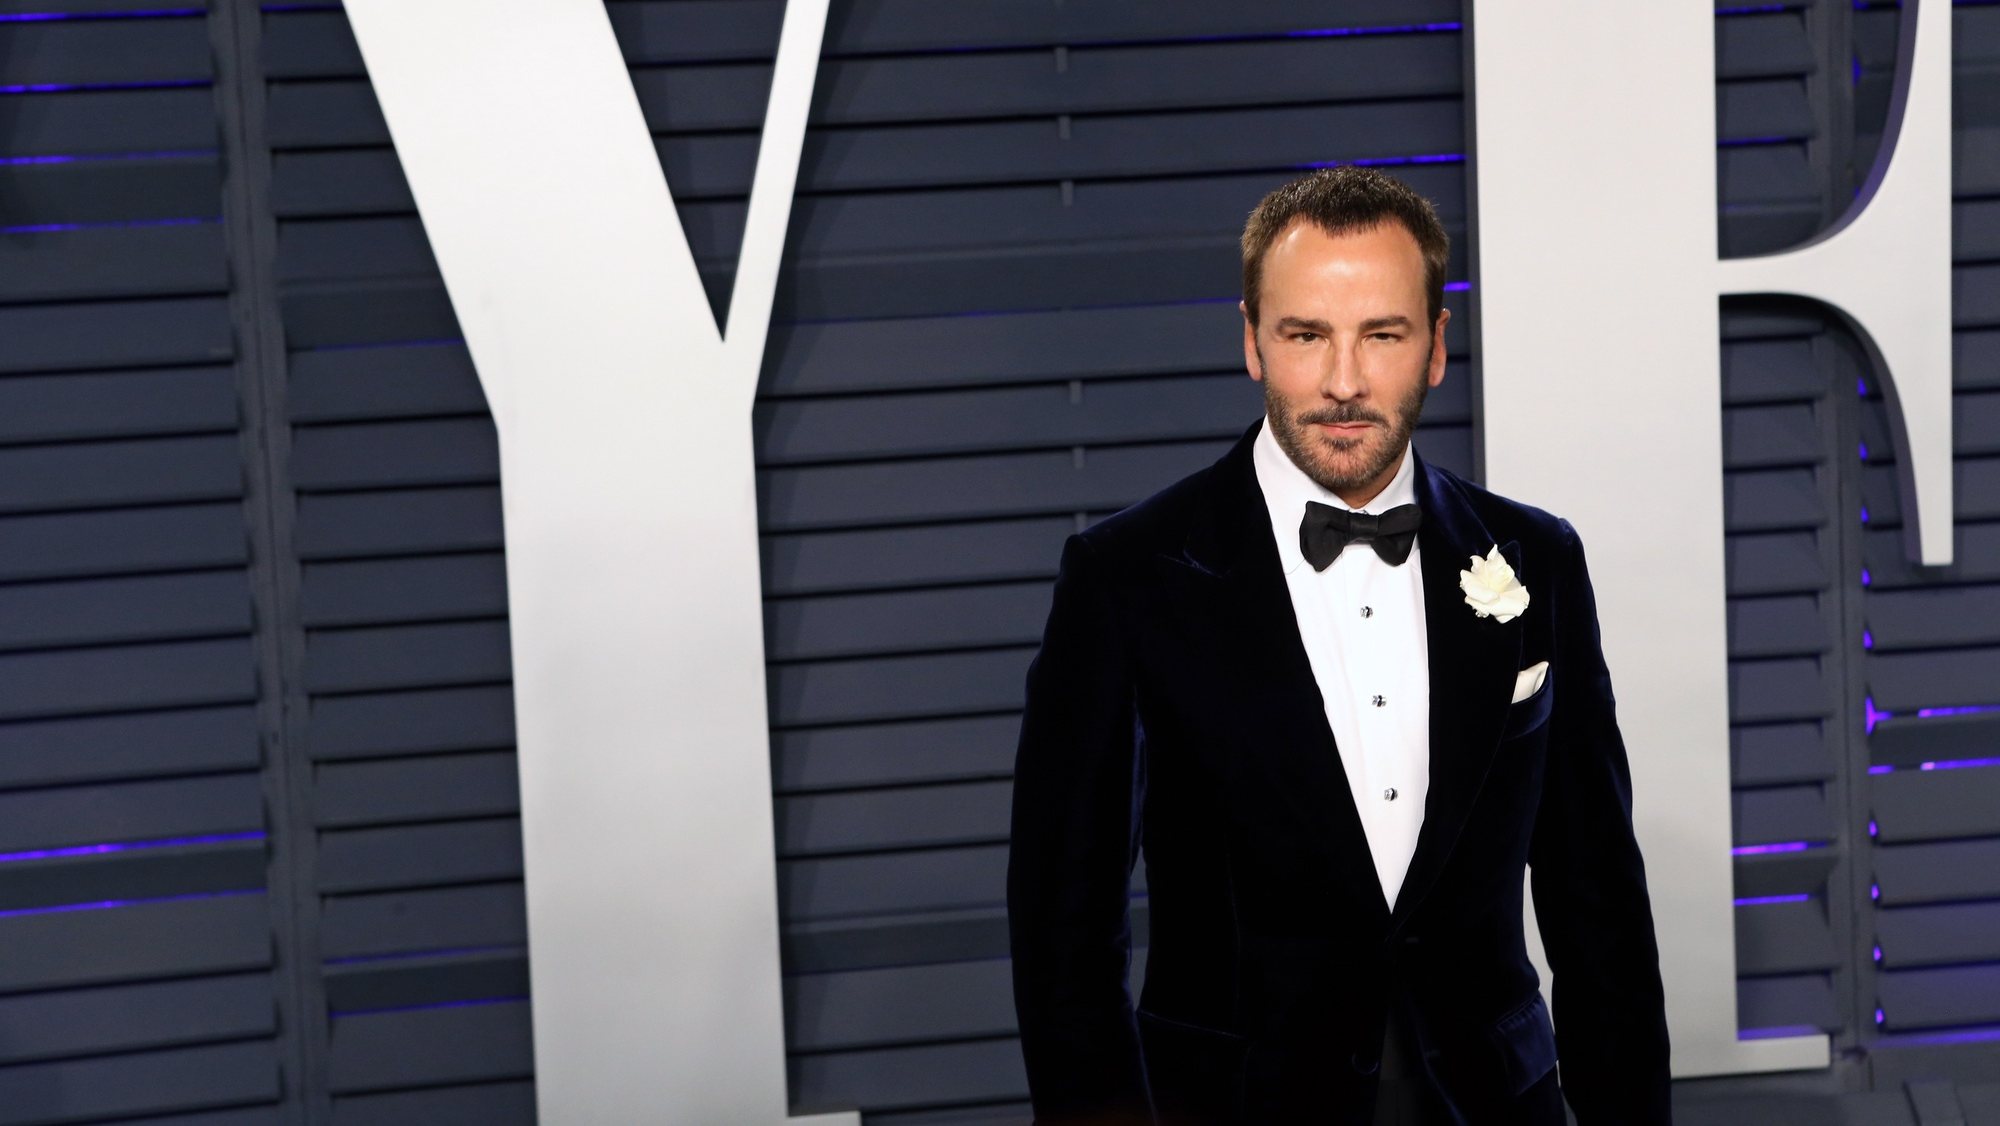 epa07395307 United States fashion designer Tom Ford poses at the 2019 Vanity Fair Oscar Party following the 91th annual Academy Awards ceremony, in Beverly Hills, California, USA, 24 February 2019. The Oscars are presented for outstanding individual or collective efforts in 24 categories in filmmaking. The Oscars are presented for outstanding individual or collective efforts in 24 categories in filmmaking.  EPA/NINA PROMMER